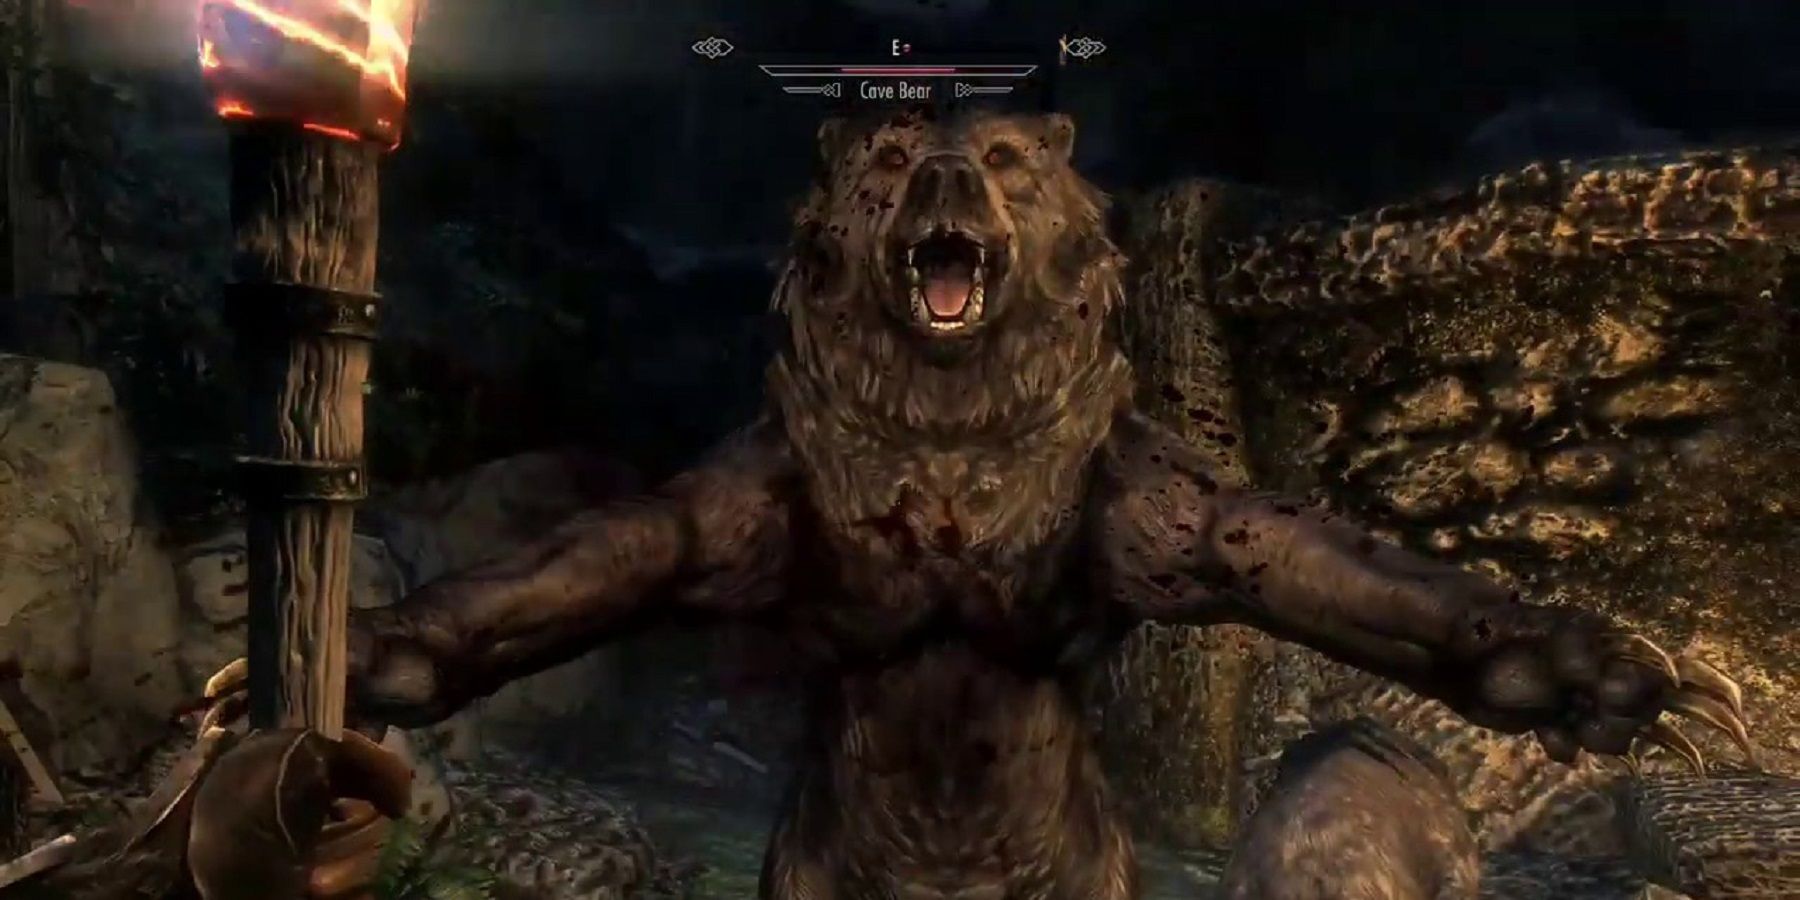 skyrim t-pose cave bear feature